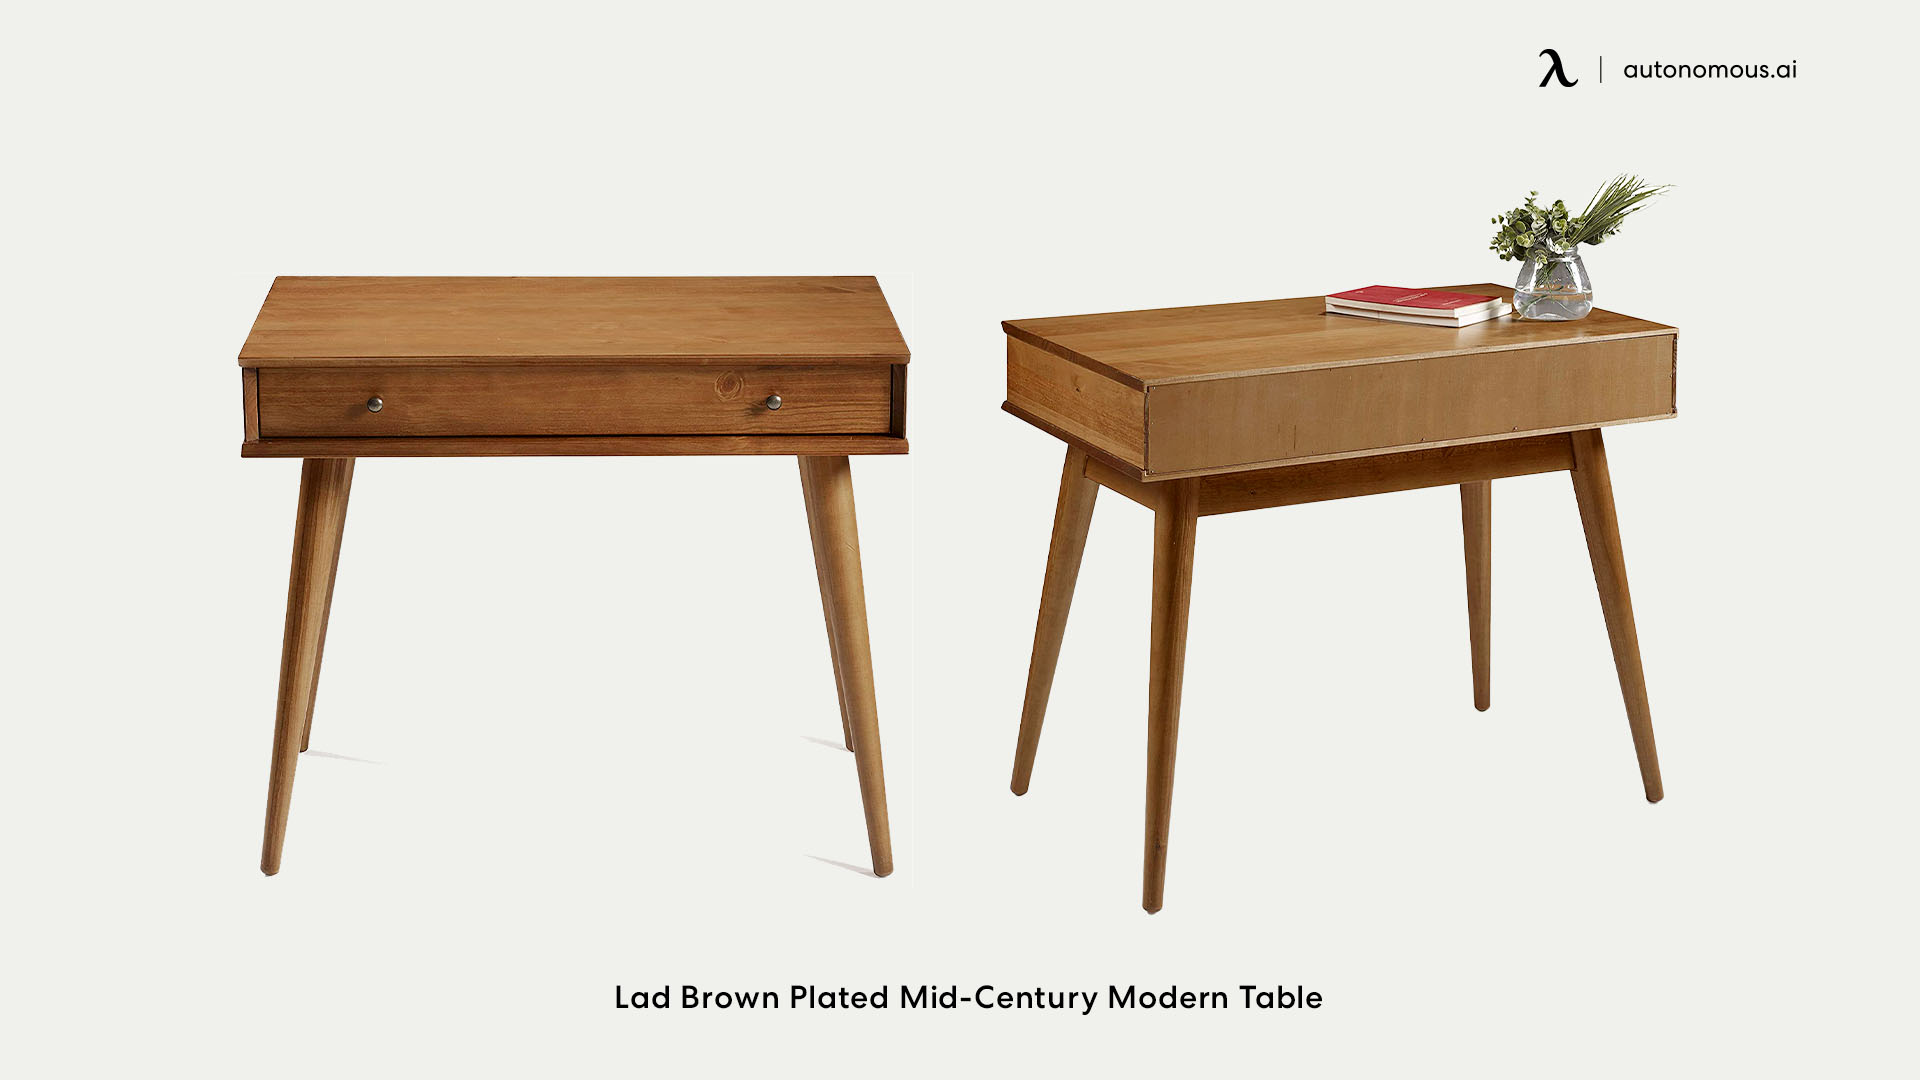 Lad Brown Plated Mid-Century Modern Table